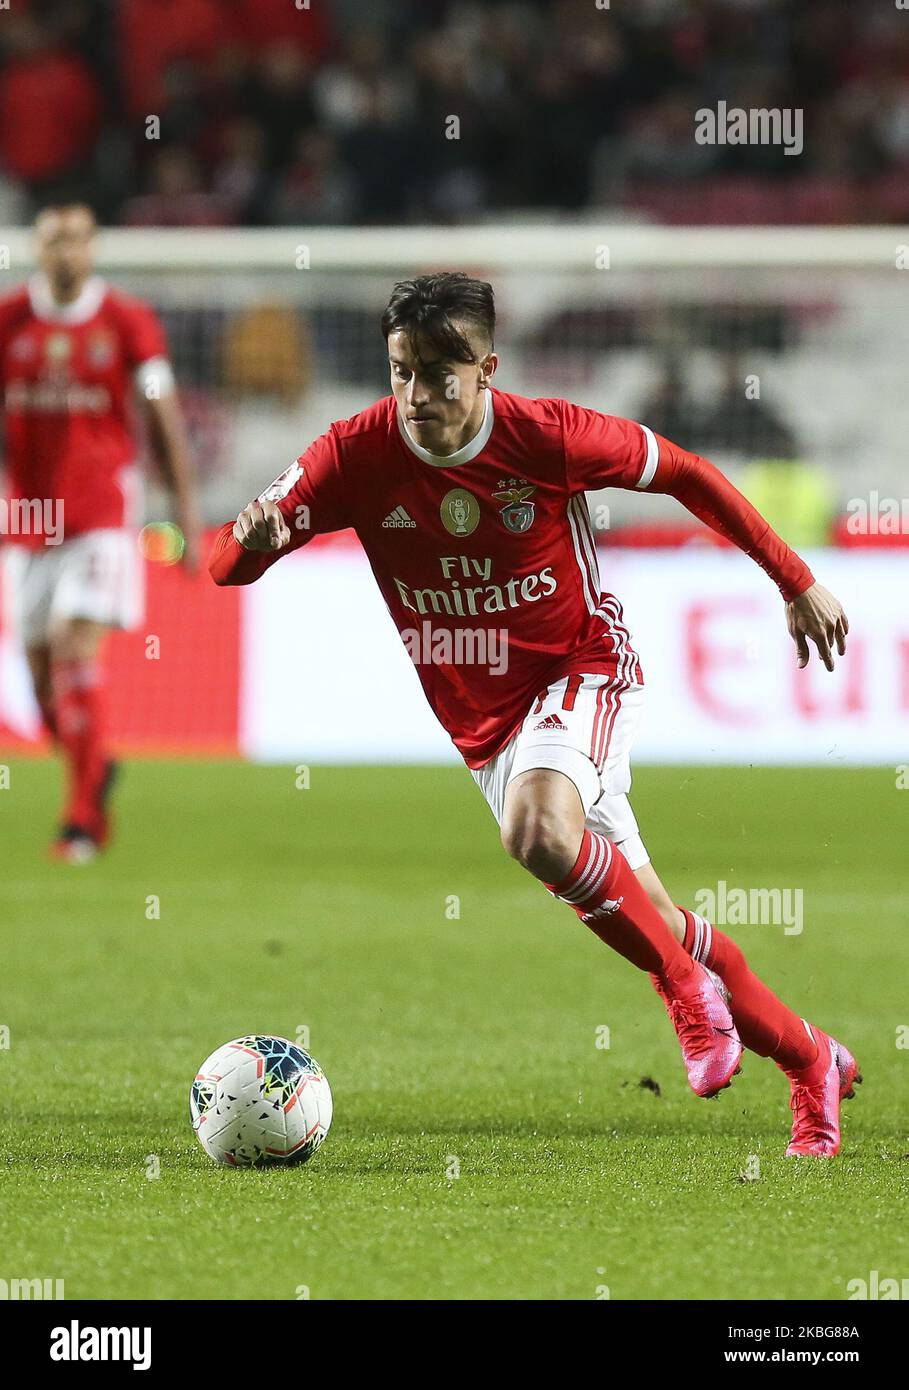 SL Benfica Forward Franco Cervi in action during the Taca de Portugal Semi Finals match between SL Benfica and FC Famalicao at Estadio da Luz on February 4, 2020 in Lisbon, Portugal. (Photo by Paulo Nascimento/NurPhoto) Stock Photo